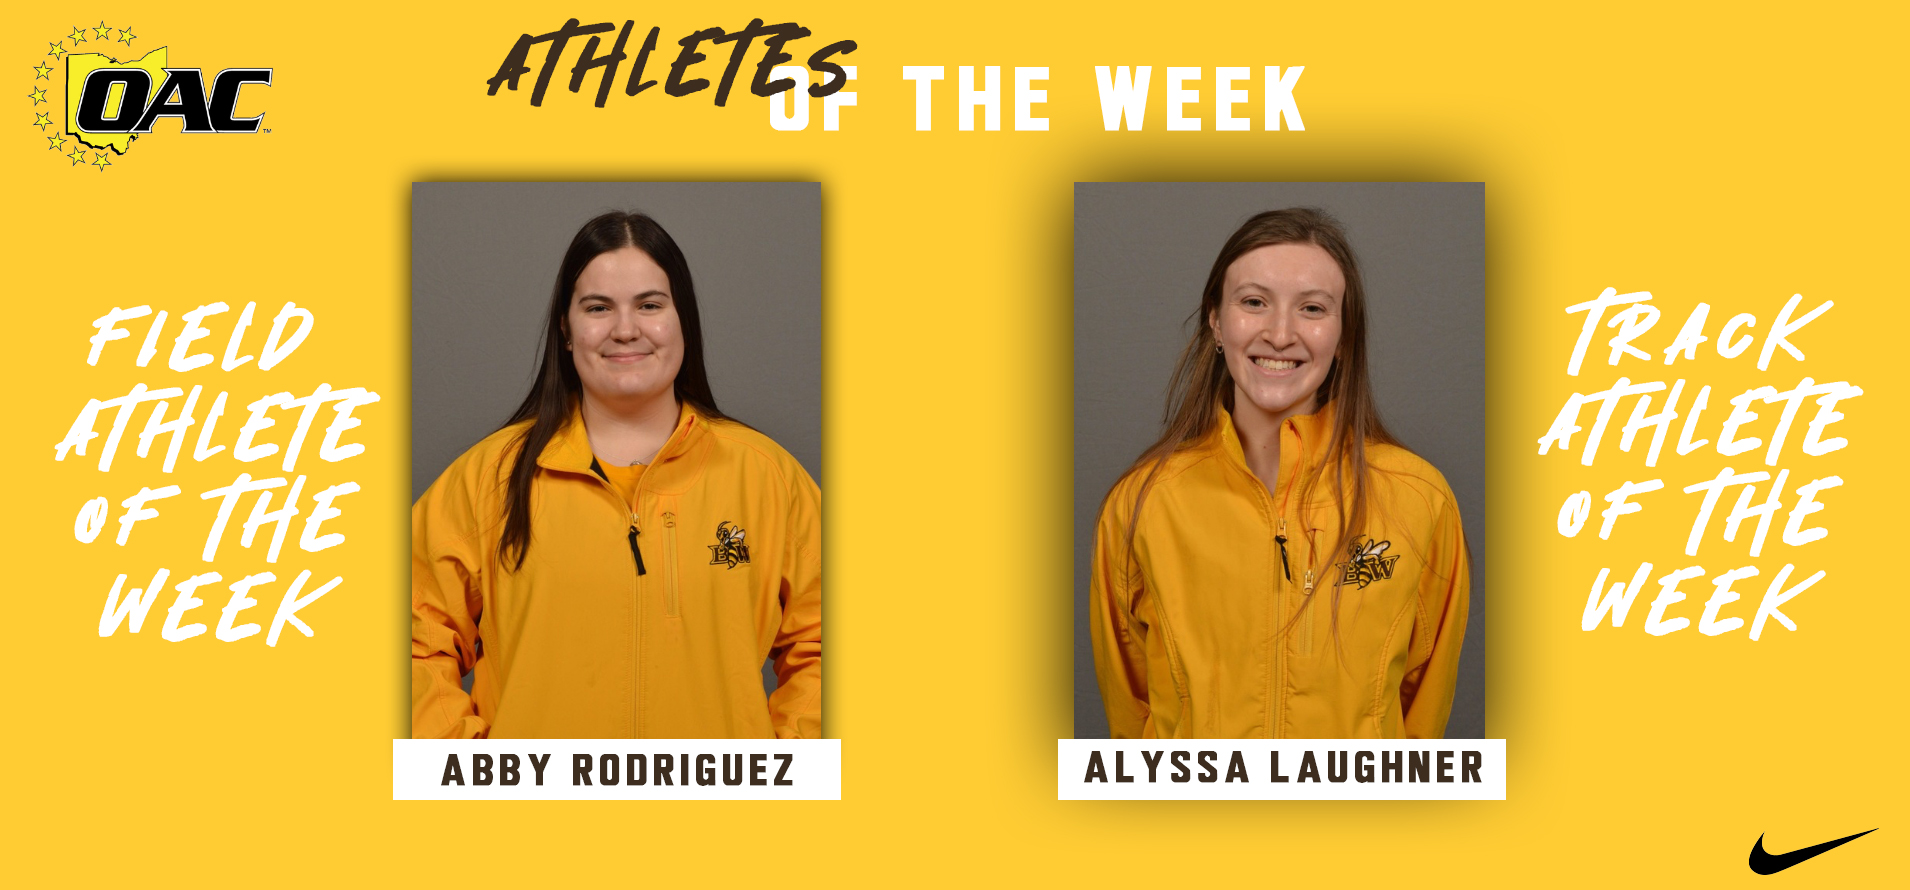 Rodriguez and Laughner Earn OAC Athlete of the Week Honors